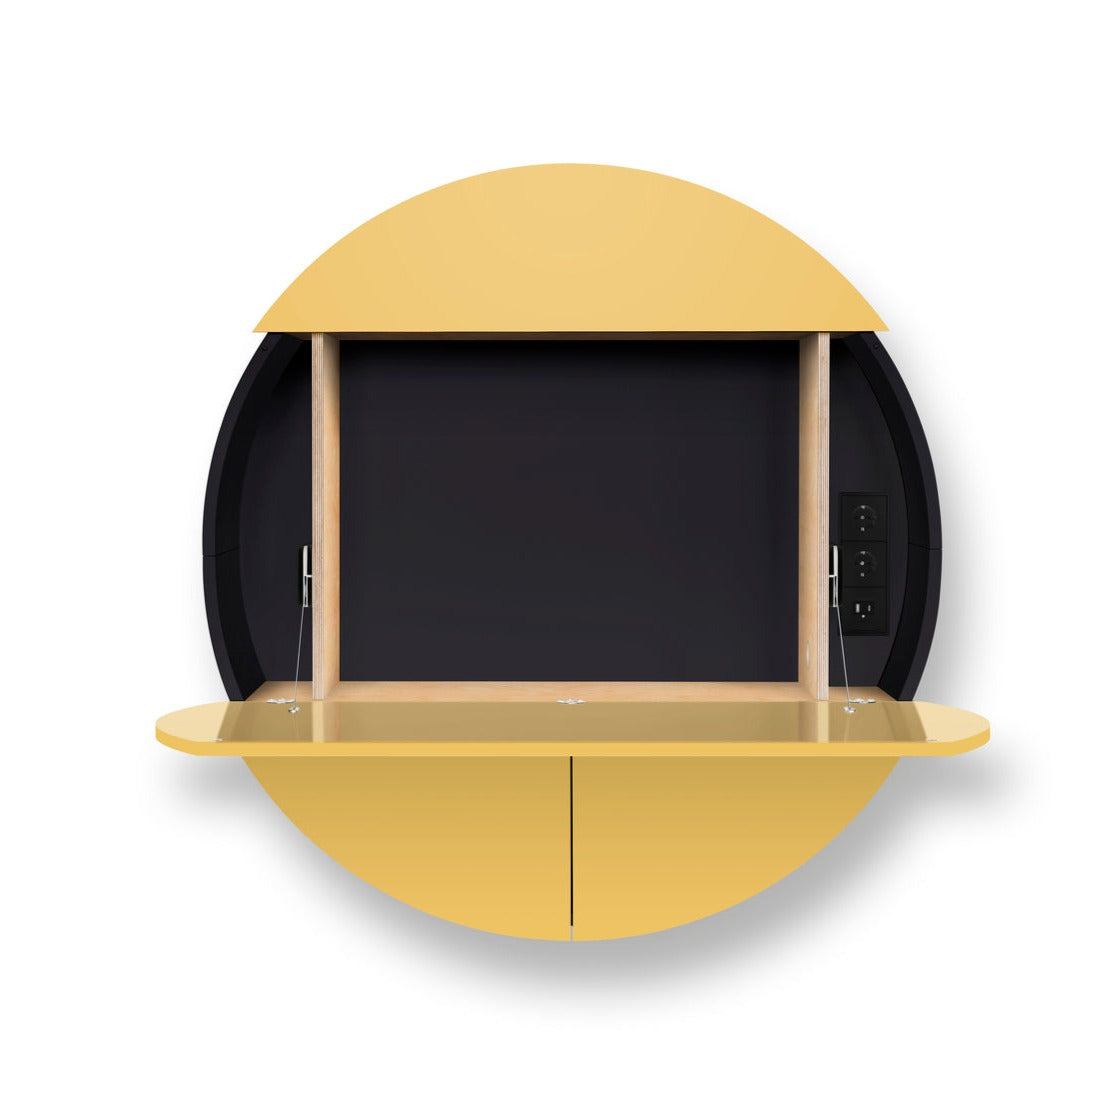 PILL Multifunctional Extra Cabinet-yellow and black-partial opened view